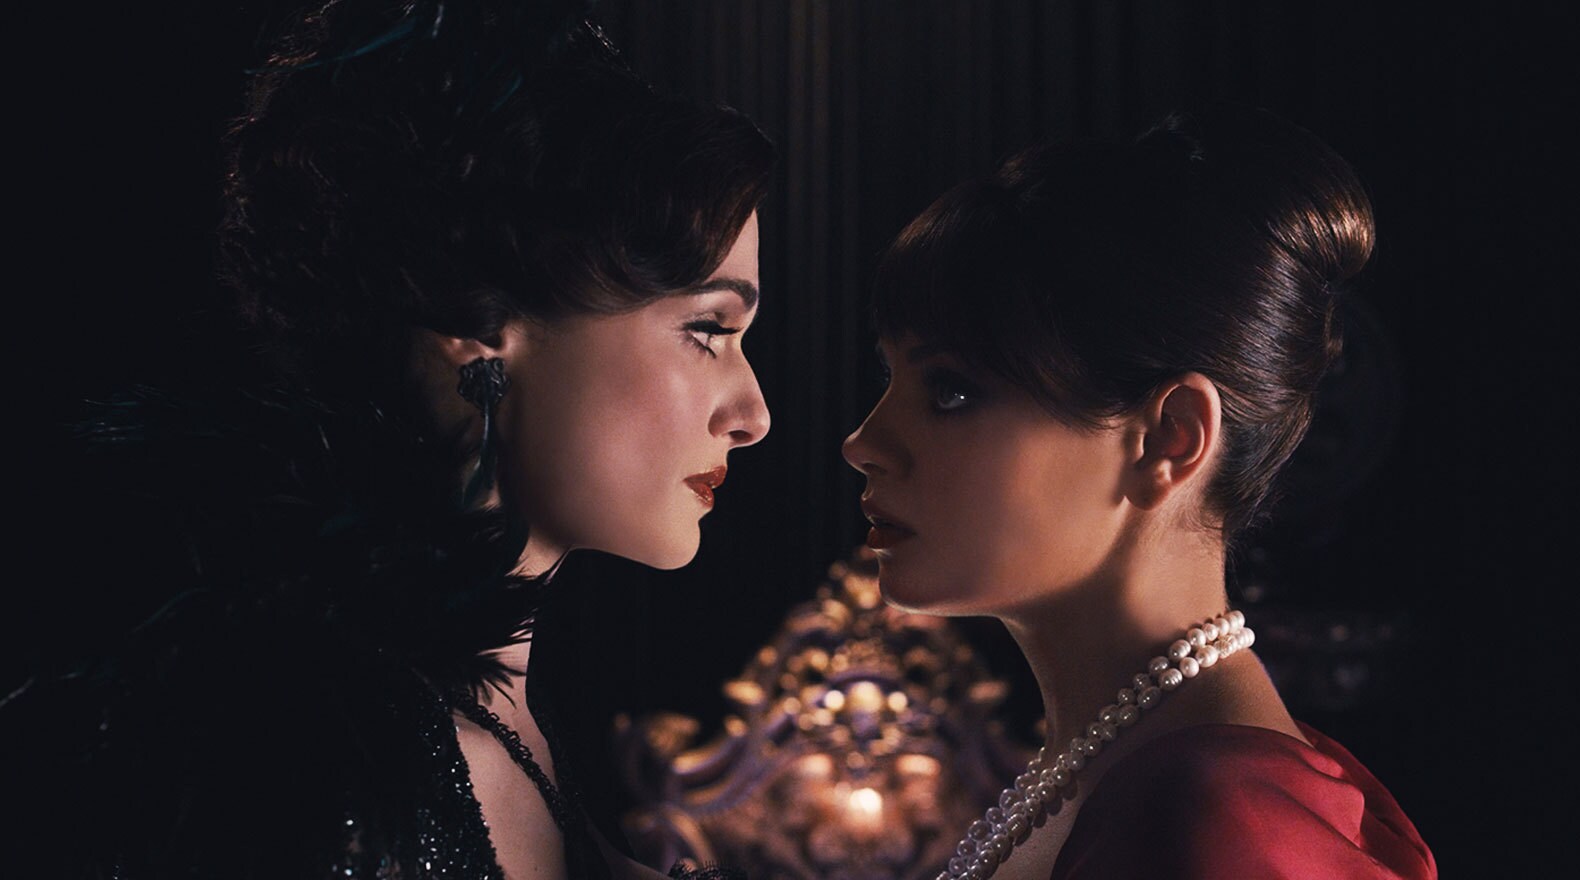 Rachel Weisz and Mila Kunis in "Oz the Great and Powerful"